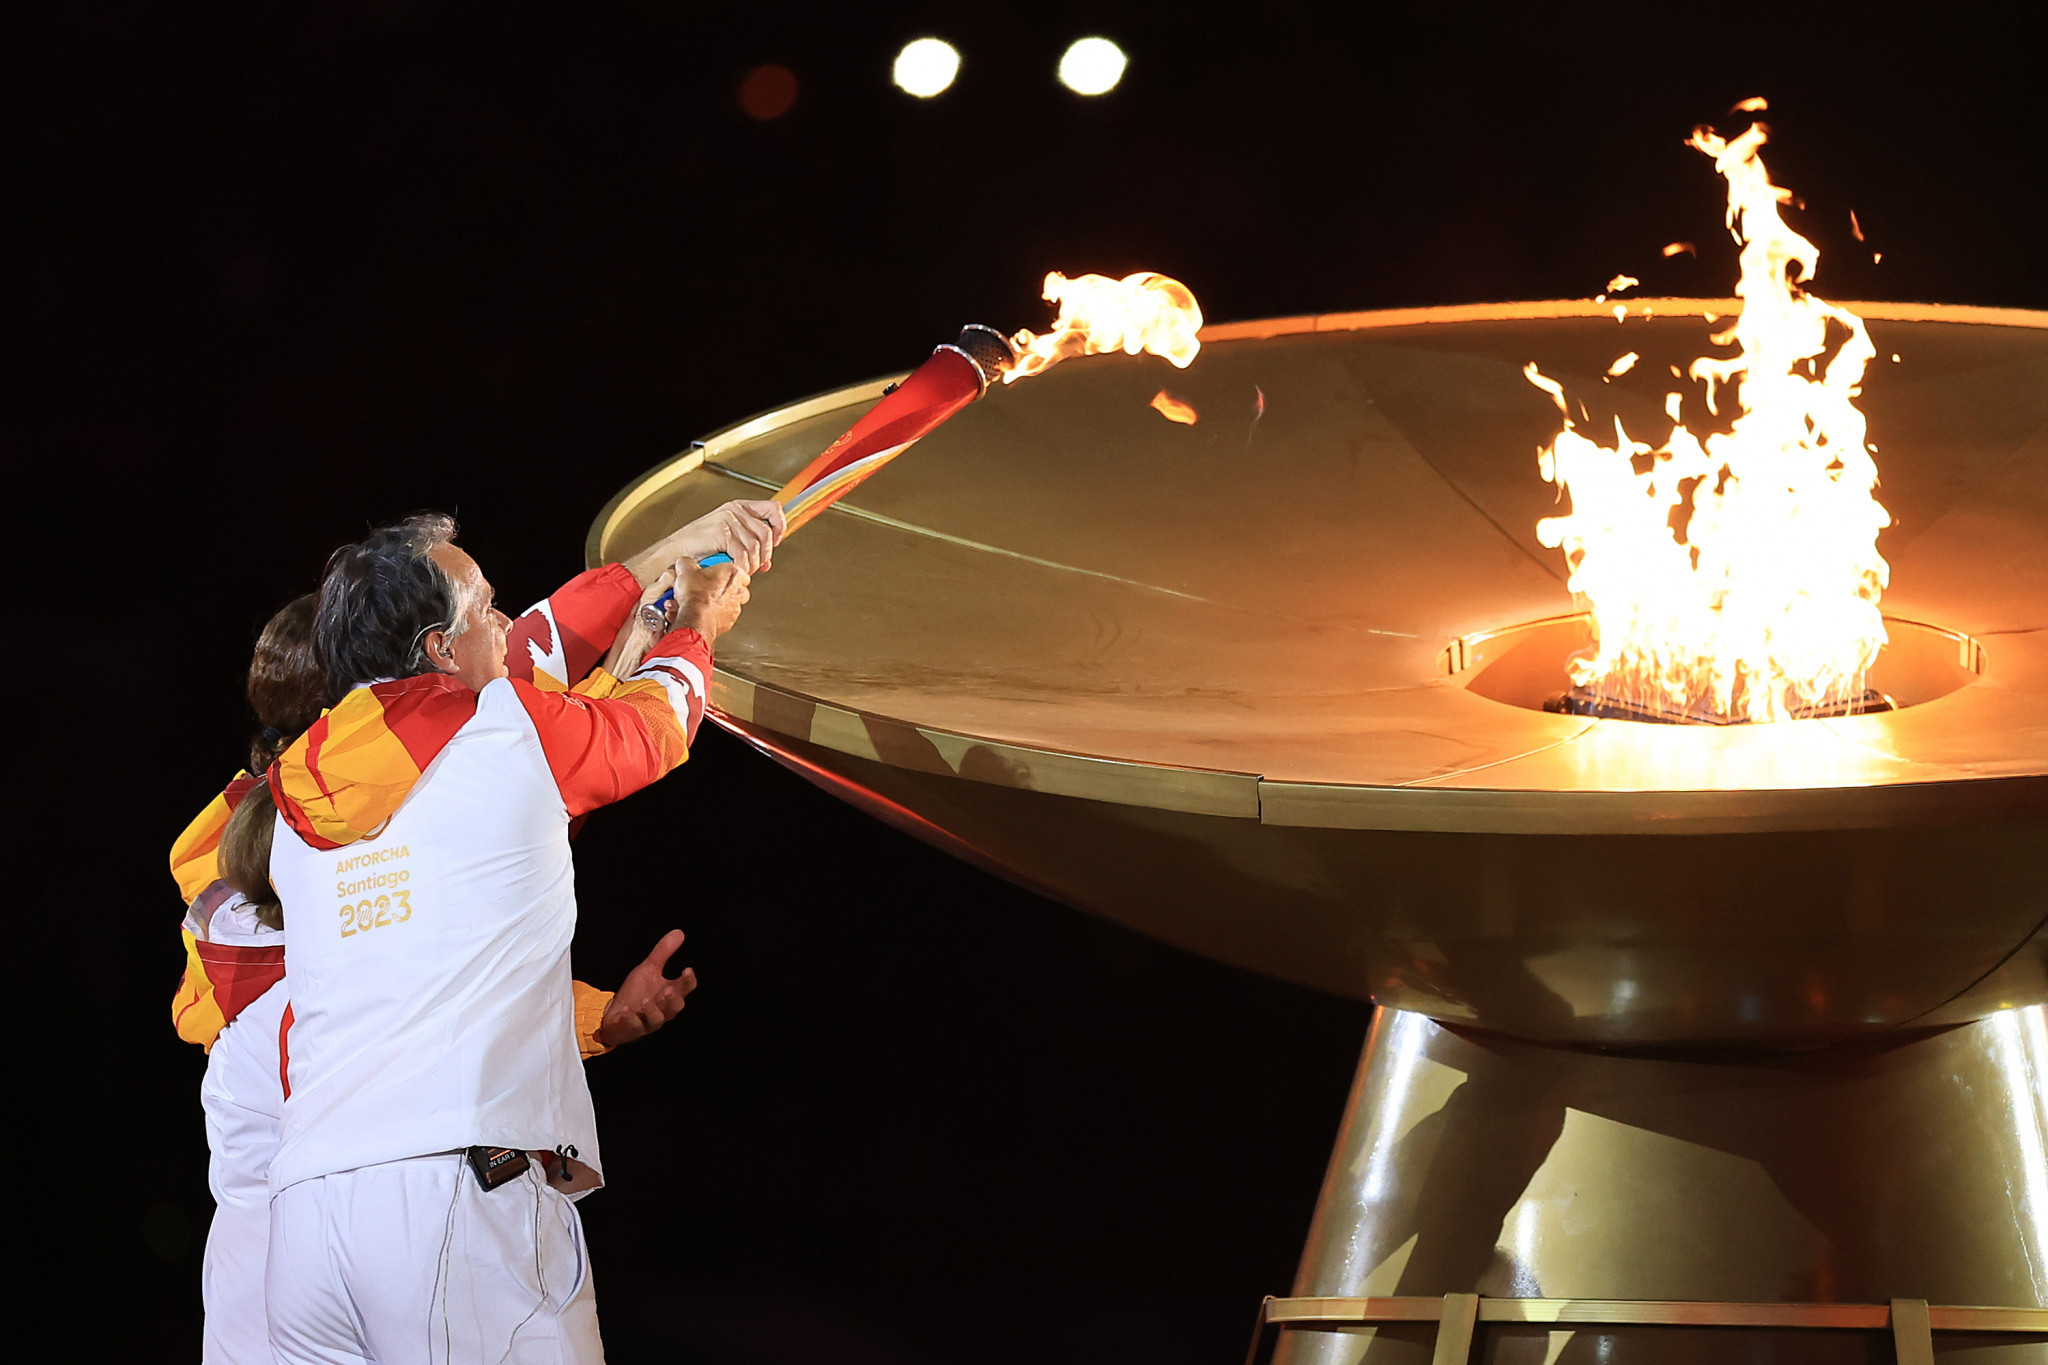 Chile's first Olympic gold medallists Nicolas Massu and Fernando Gonzalez joined 93-year-old Luvy Lopez to light the Cauldron for the Opening Ceremony at Santiago 2023 ©Getty Images